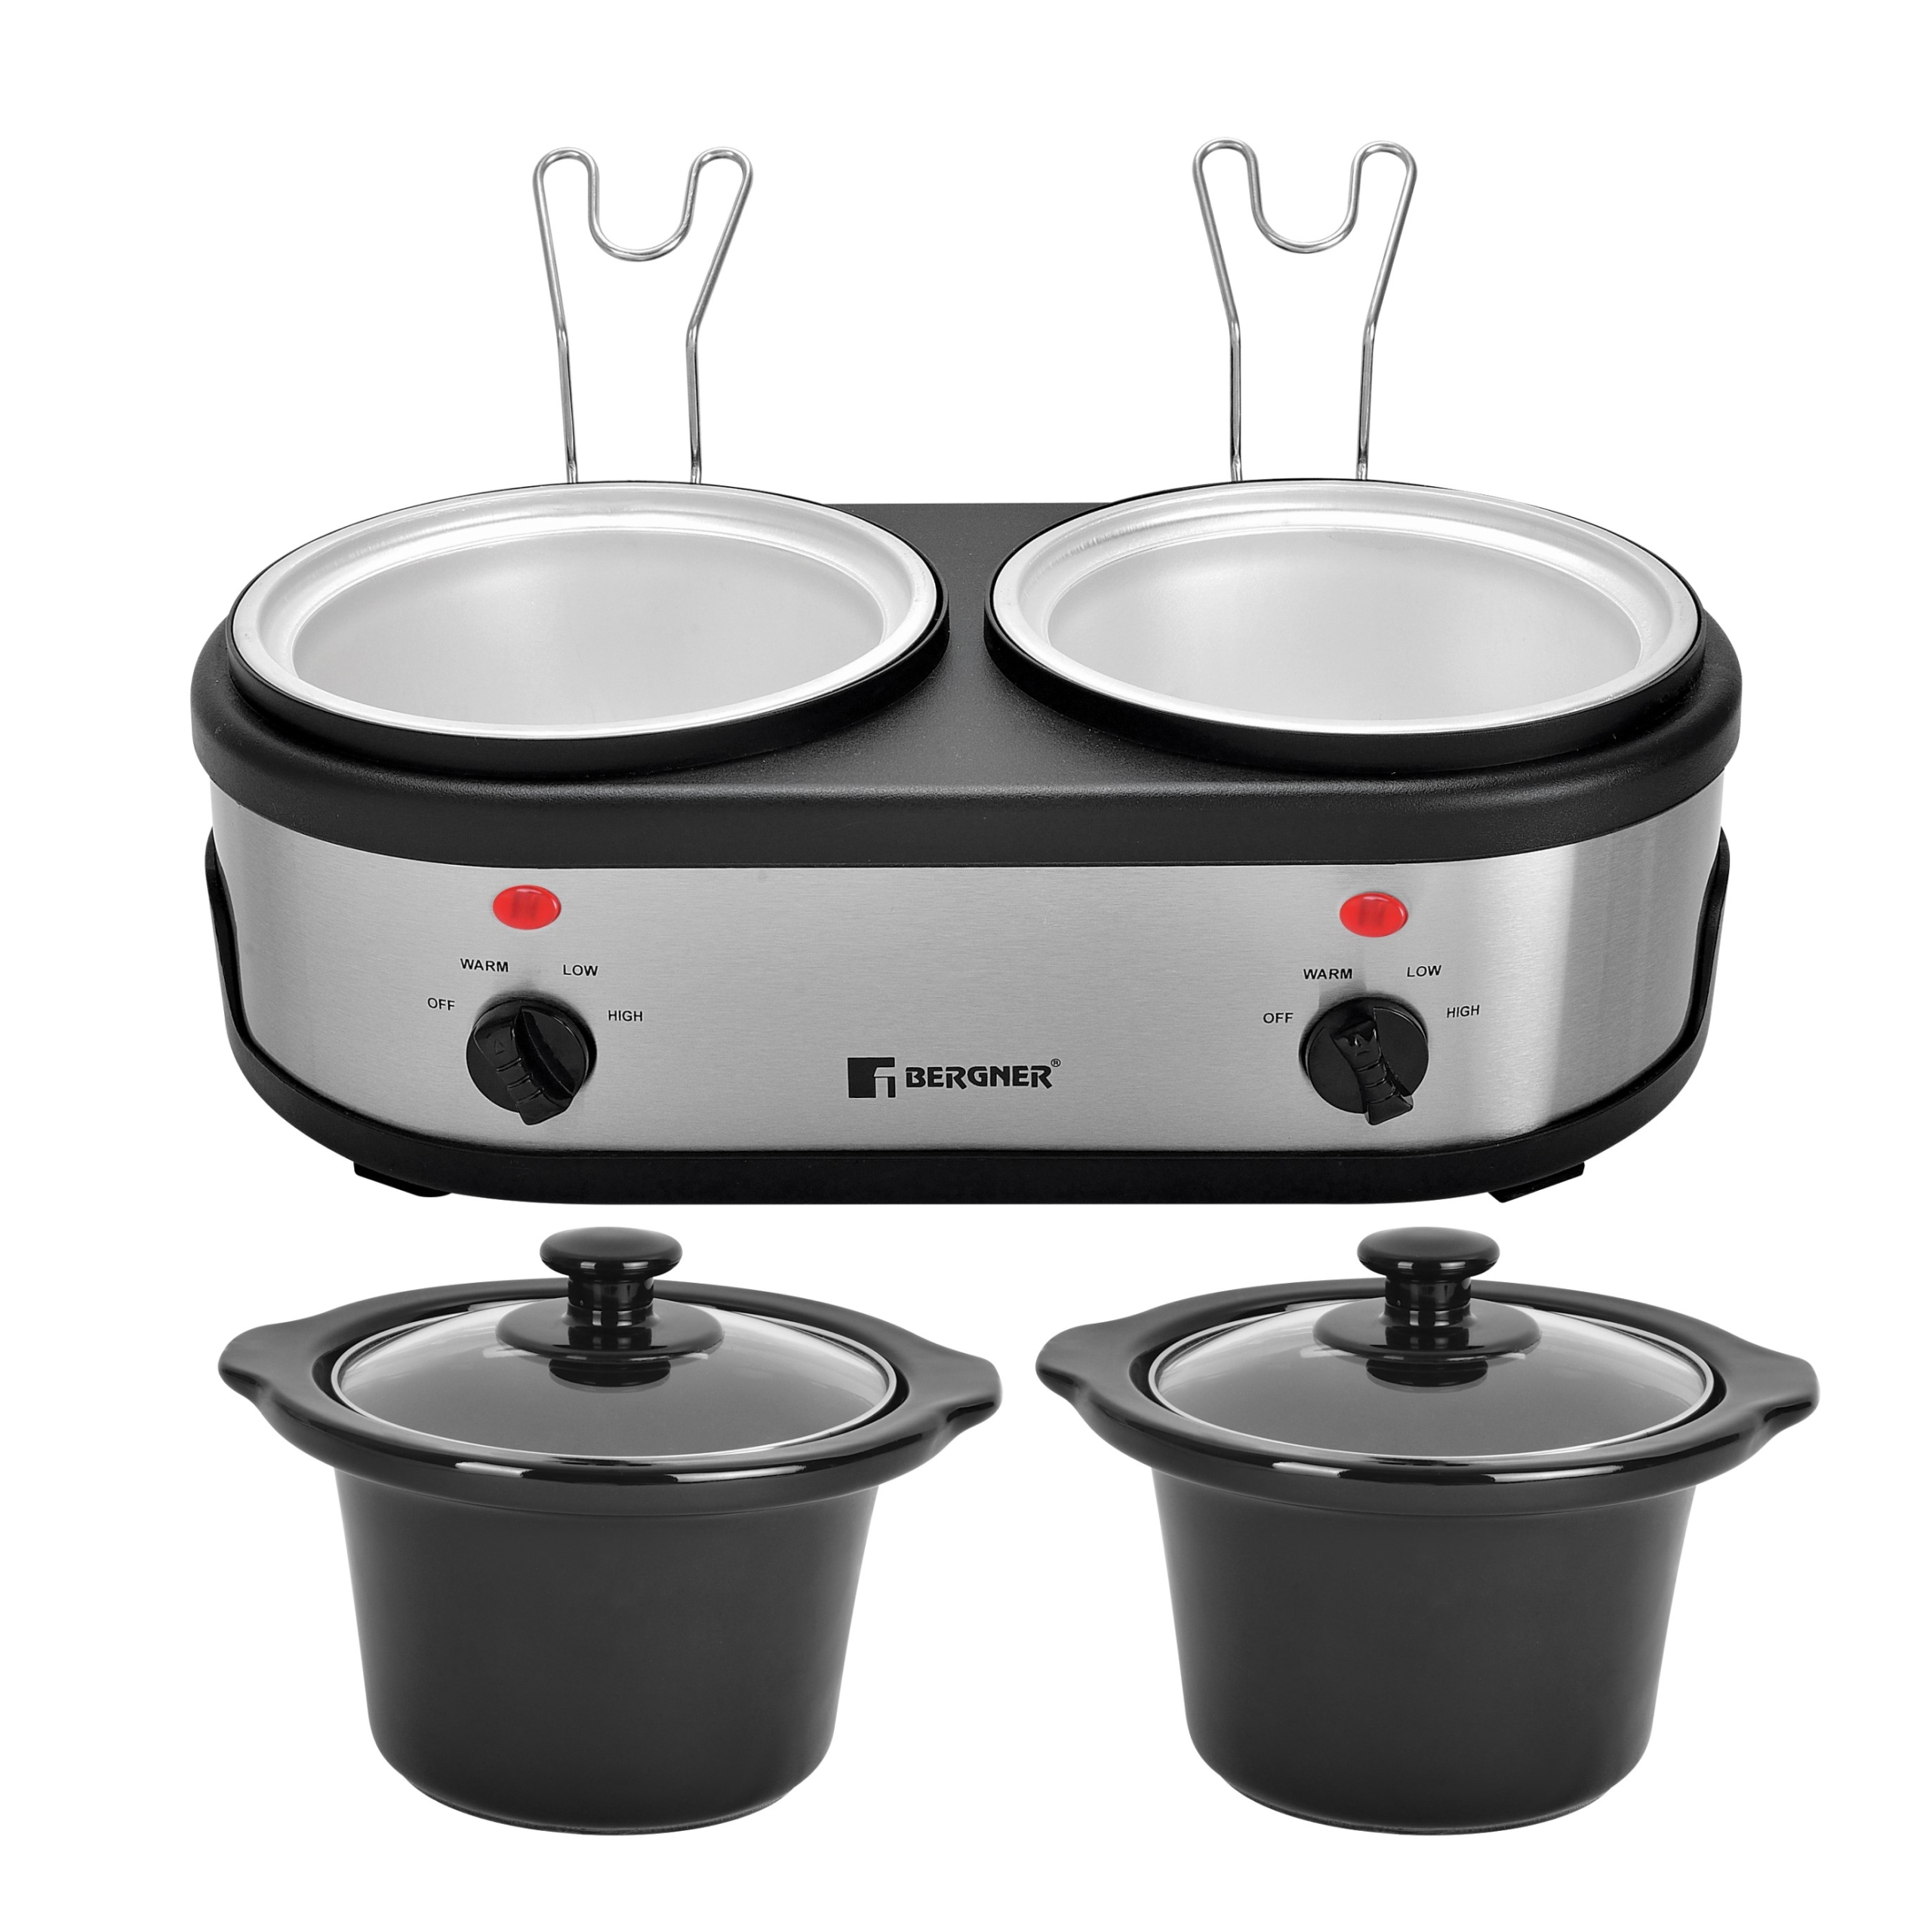 Bergner Supreme Twin Pot Slow Cooker with 1.5 Ltr capacity